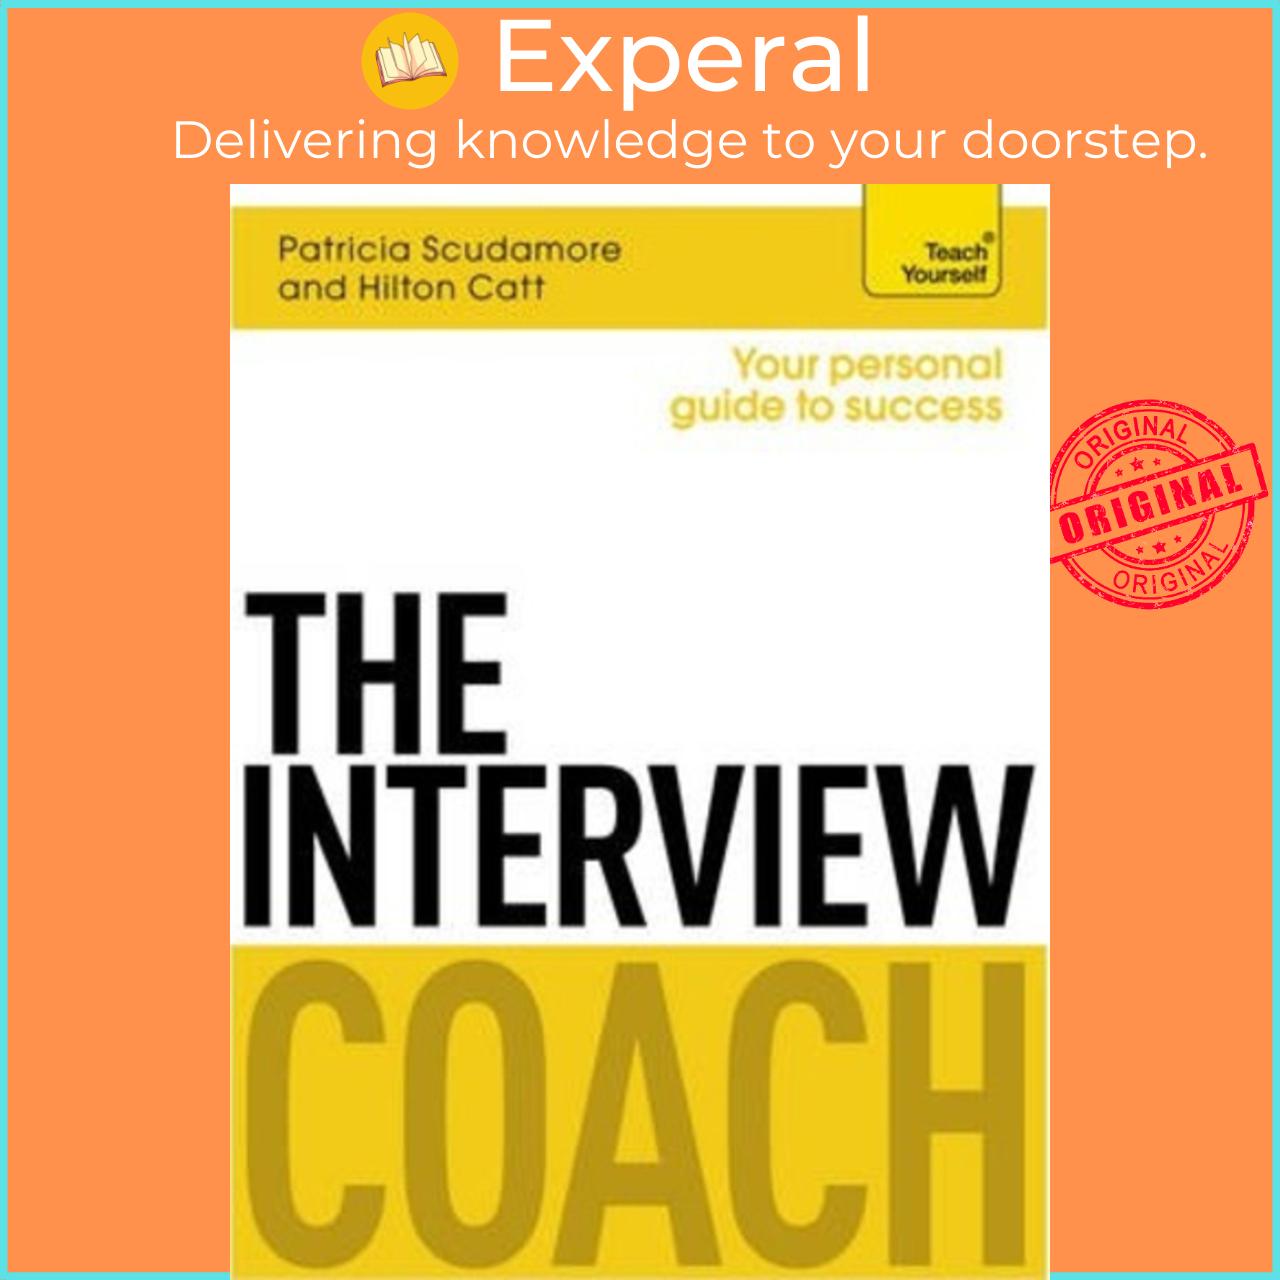 Sách - The Interview Coach: Teach Yourself by Patricia Scudamore (UK edition, paperback)